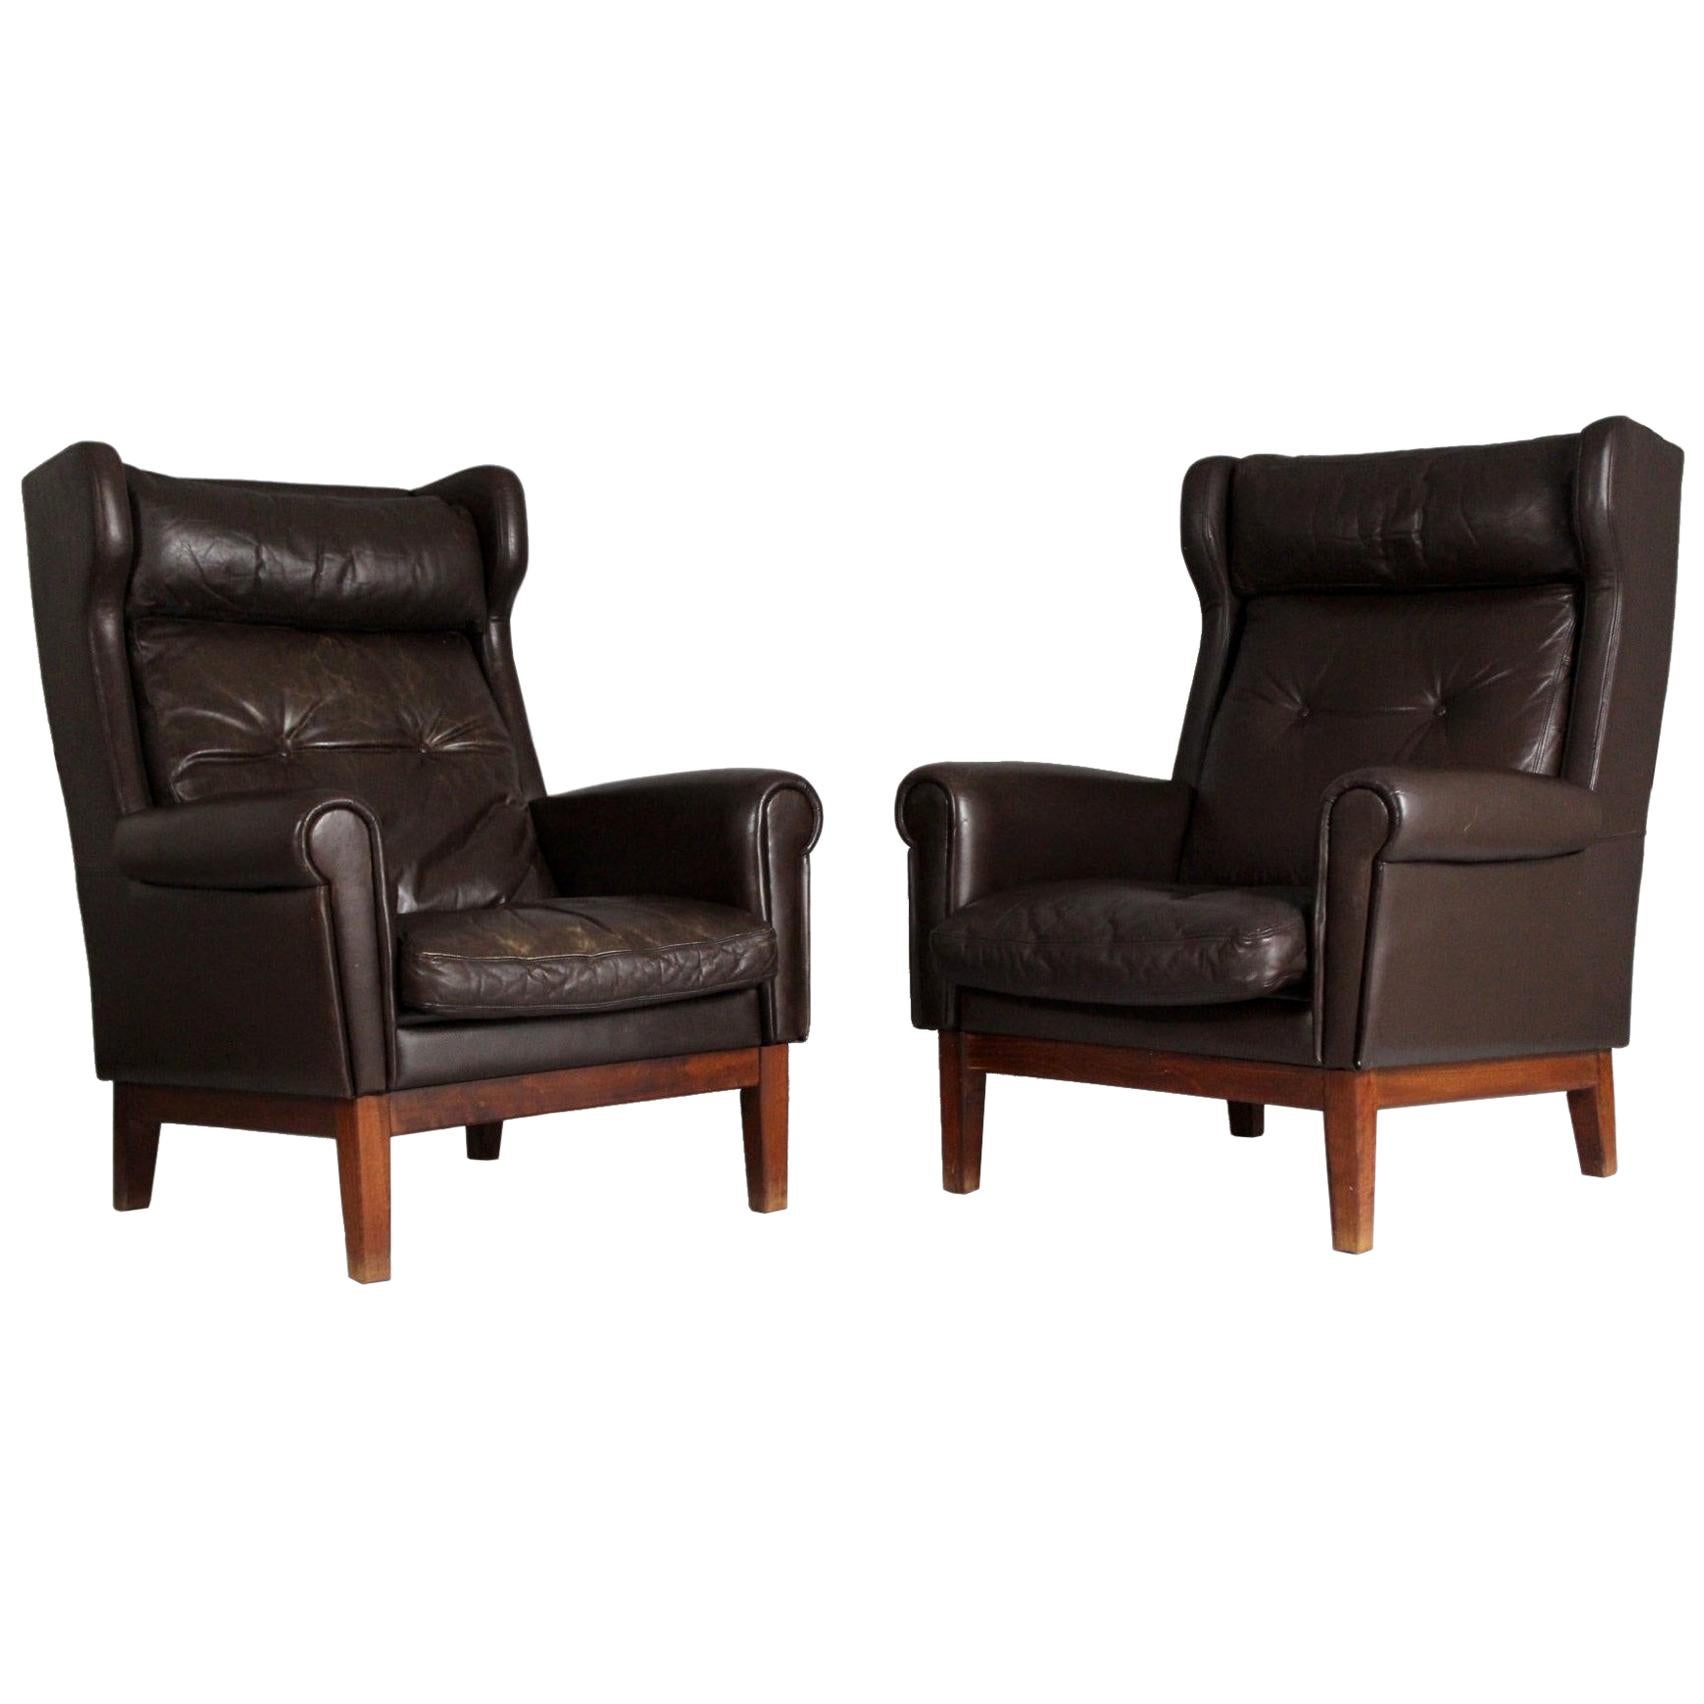 Pair of Scandinavian Leather Club Chairs, 1970s